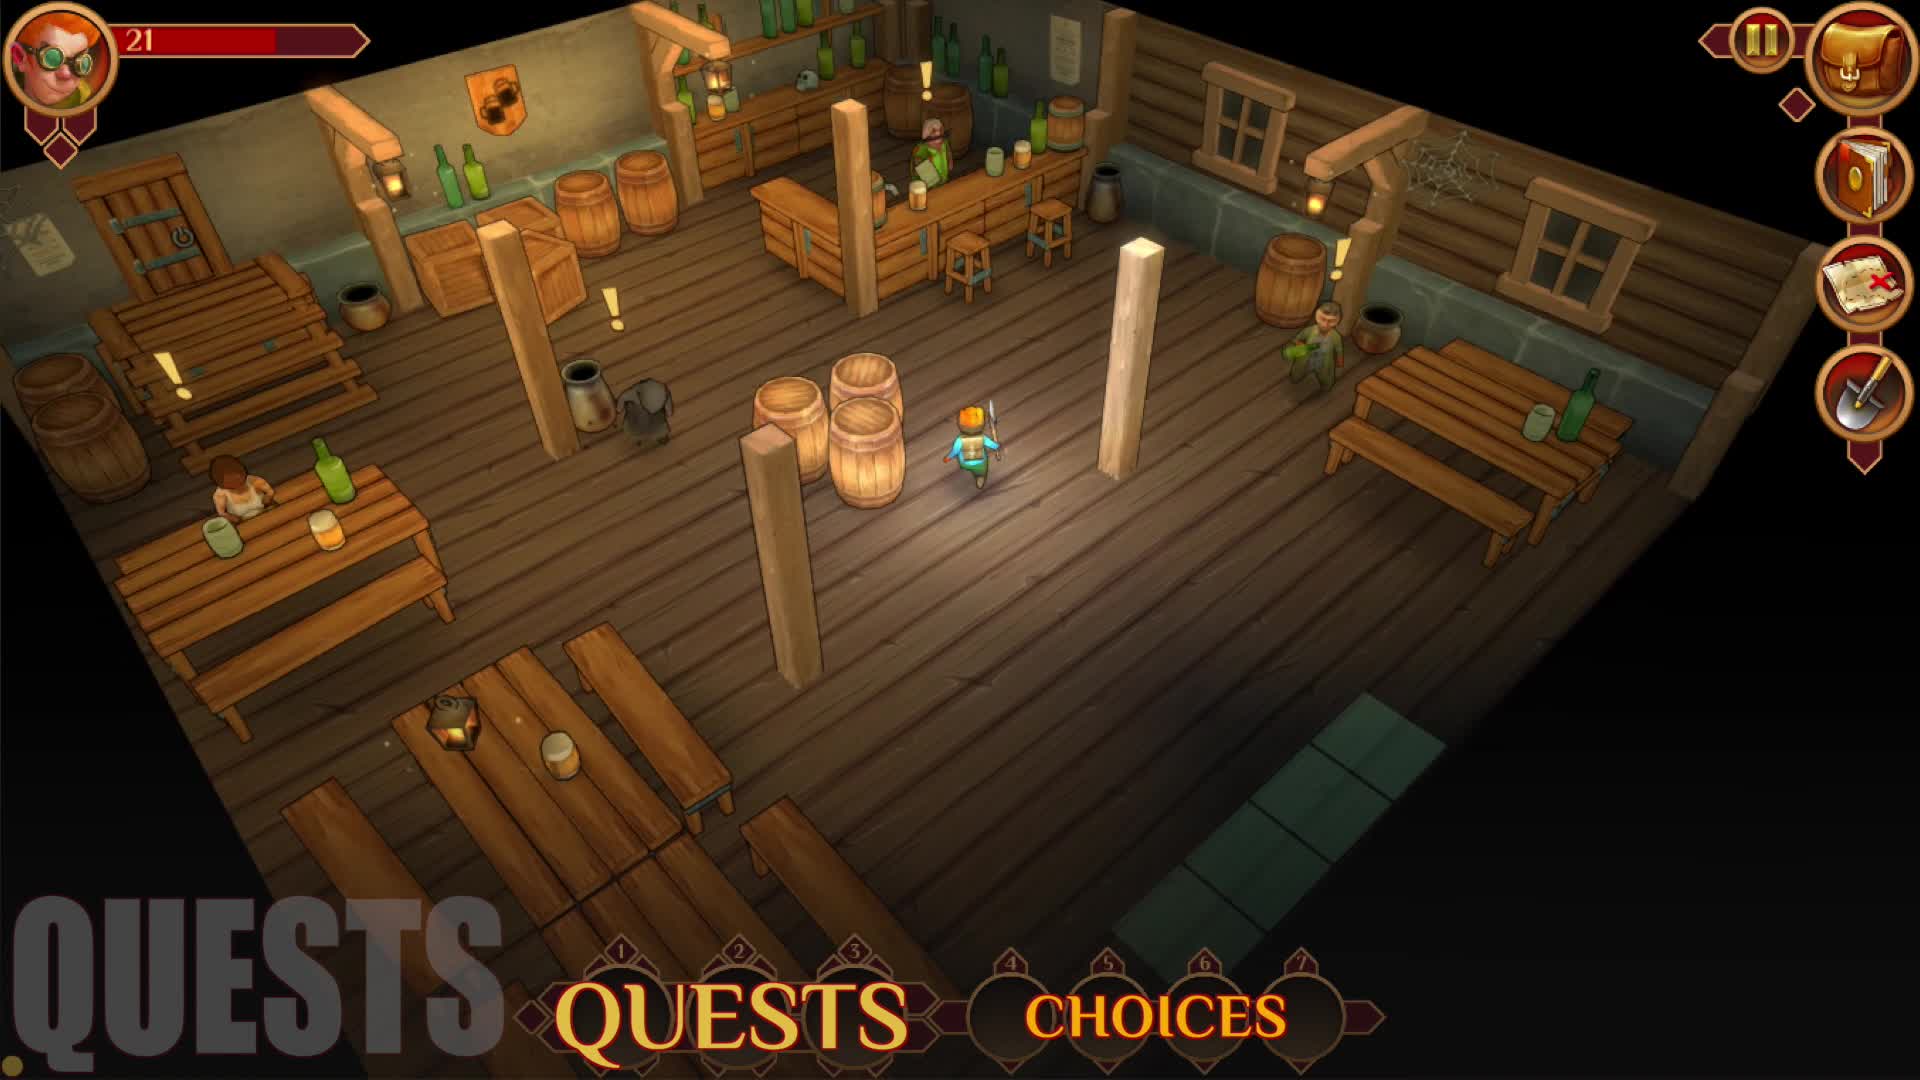 Quest Hunter instal the new for android